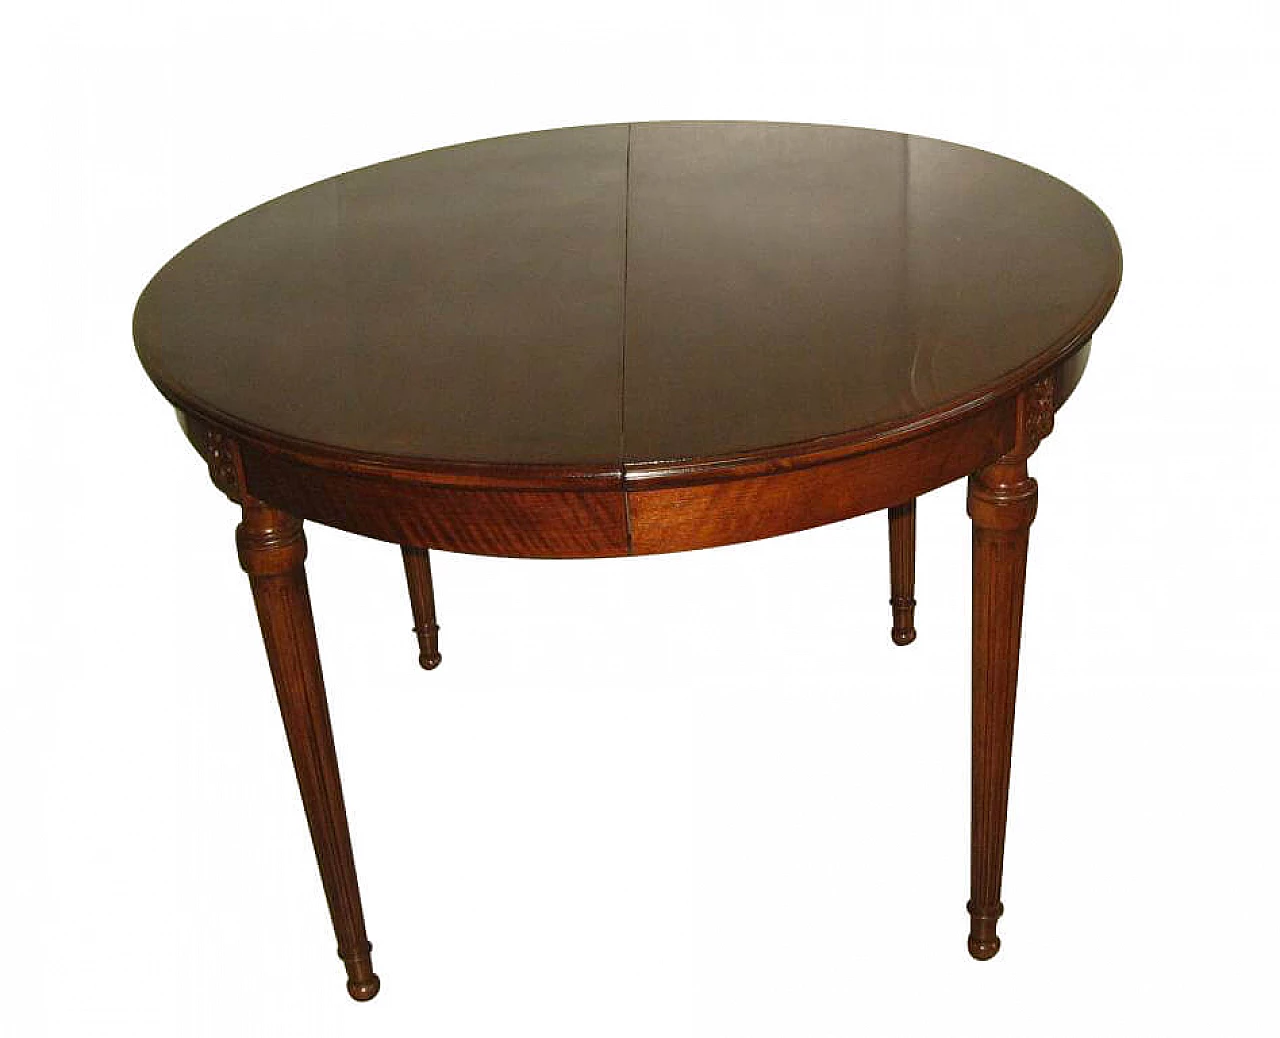 Extendable oval table in walnut, late 19th century 1245985